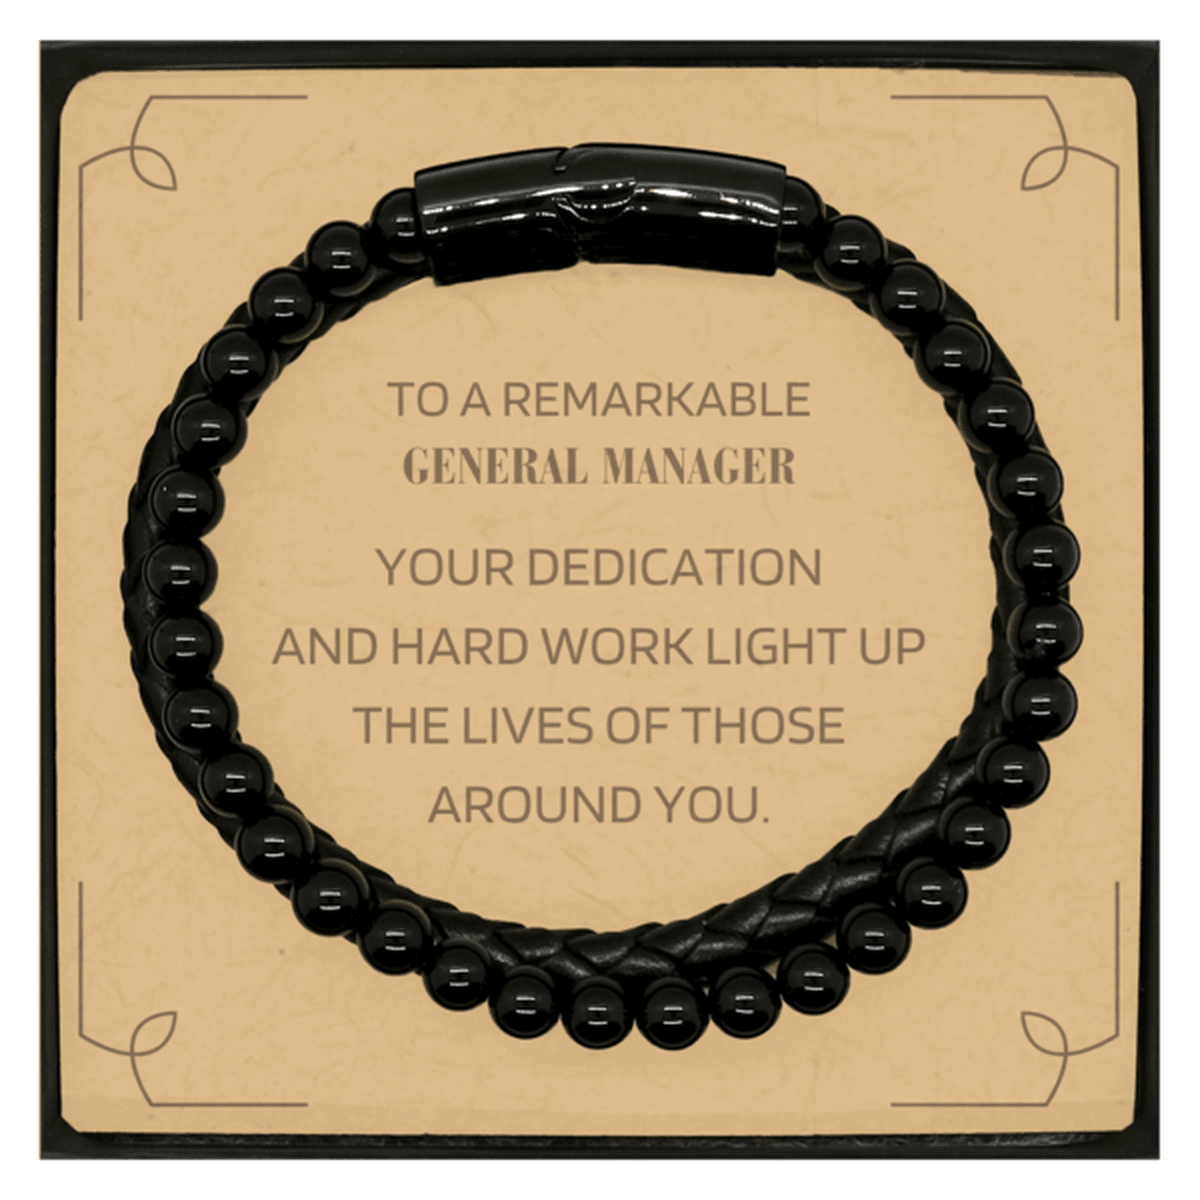 Remarkable General Manager Gifts, Your dedication and hard work, Inspirational Birthday Christmas Unique Stone Leather Bracelets For General Manager, Coworkers, Men, Women, Friends - Mallard Moon Gift Shop